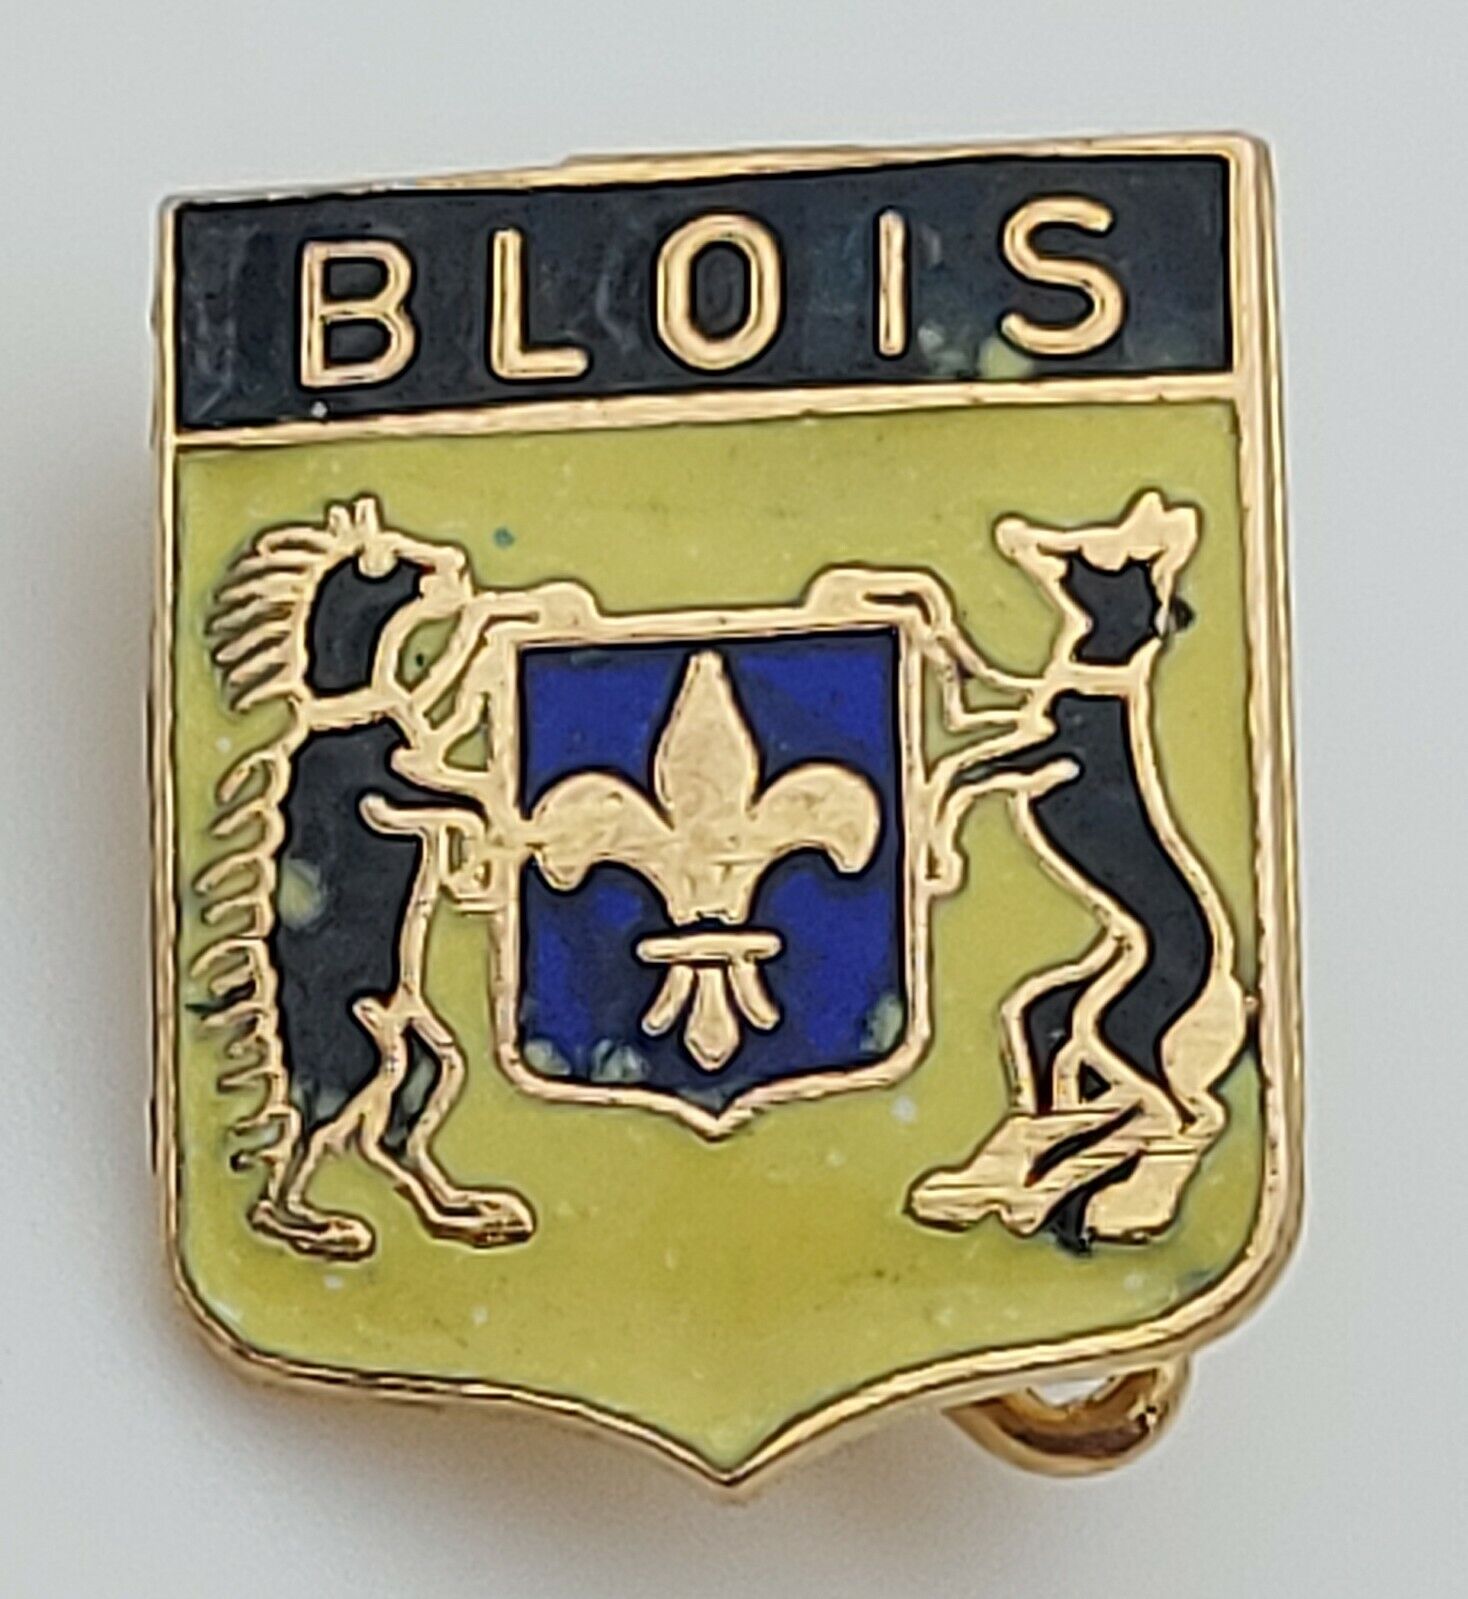 BLOIS - France coat of arms, old vintage metal pin badge lapel 